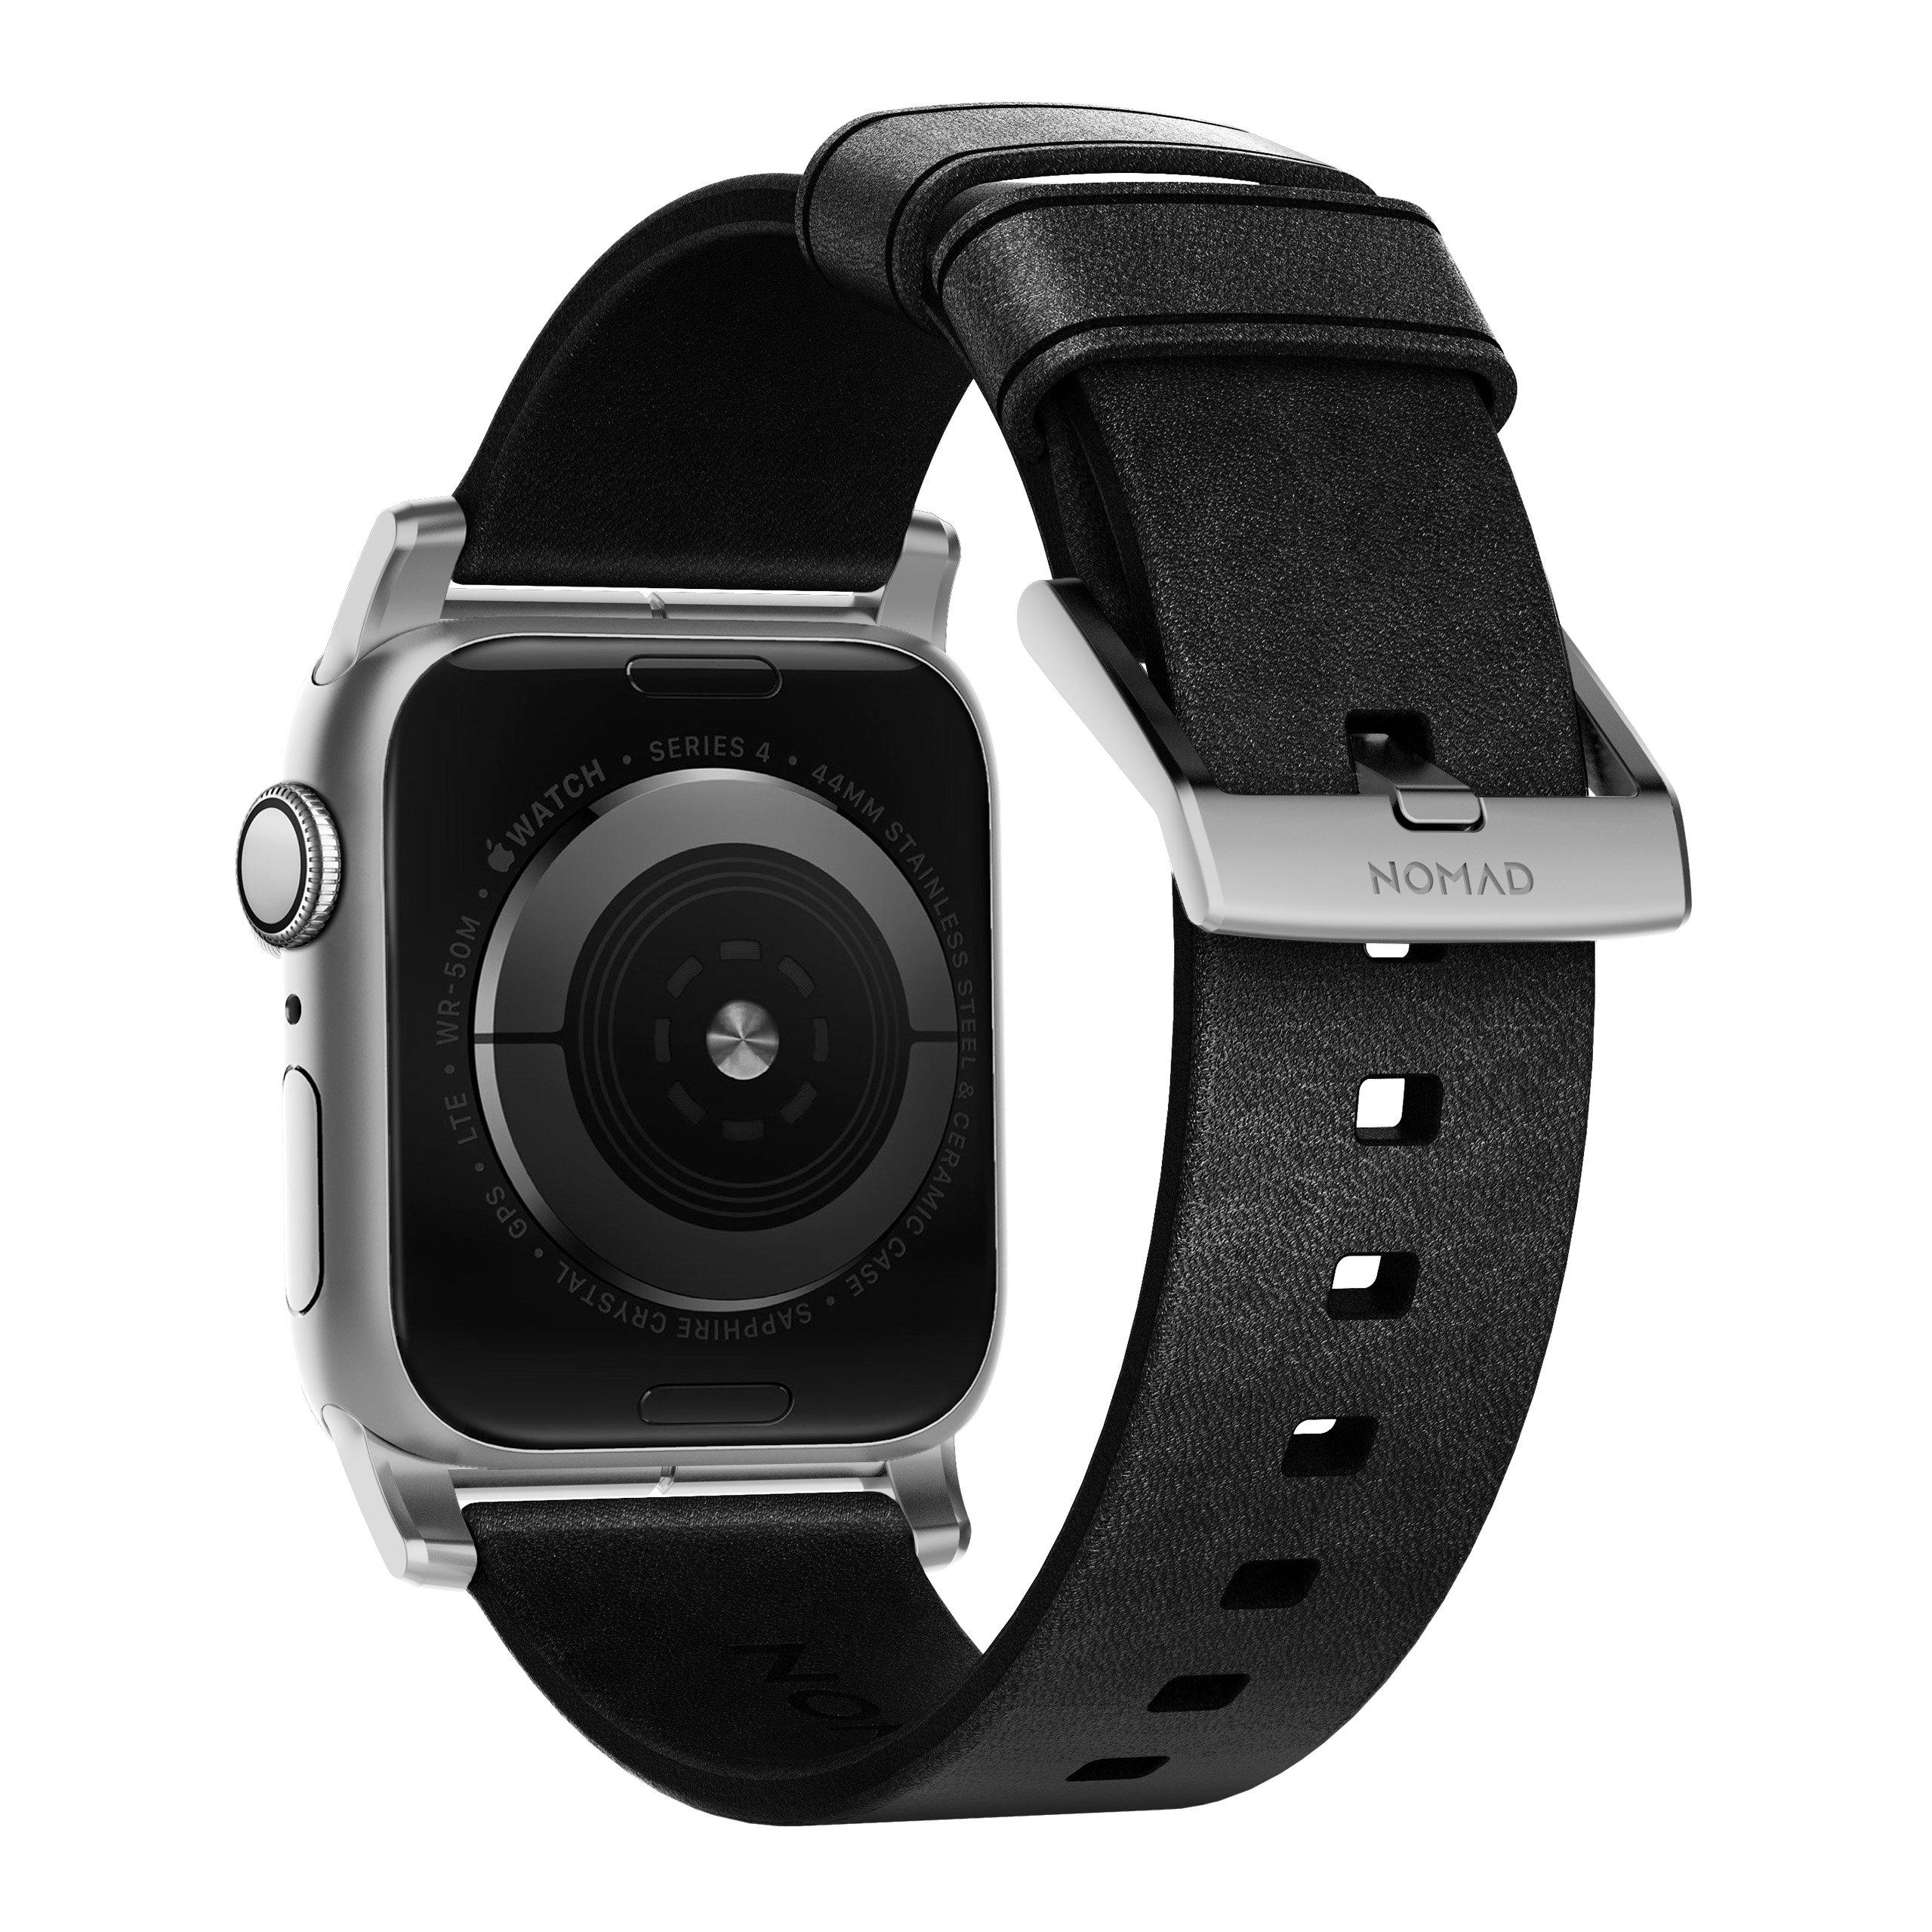 NOMAD Modern Strap Black Horween Leather for Apple Watch 44mm/42mm, Silver Hardware Apple Watch Strap NOMAD 